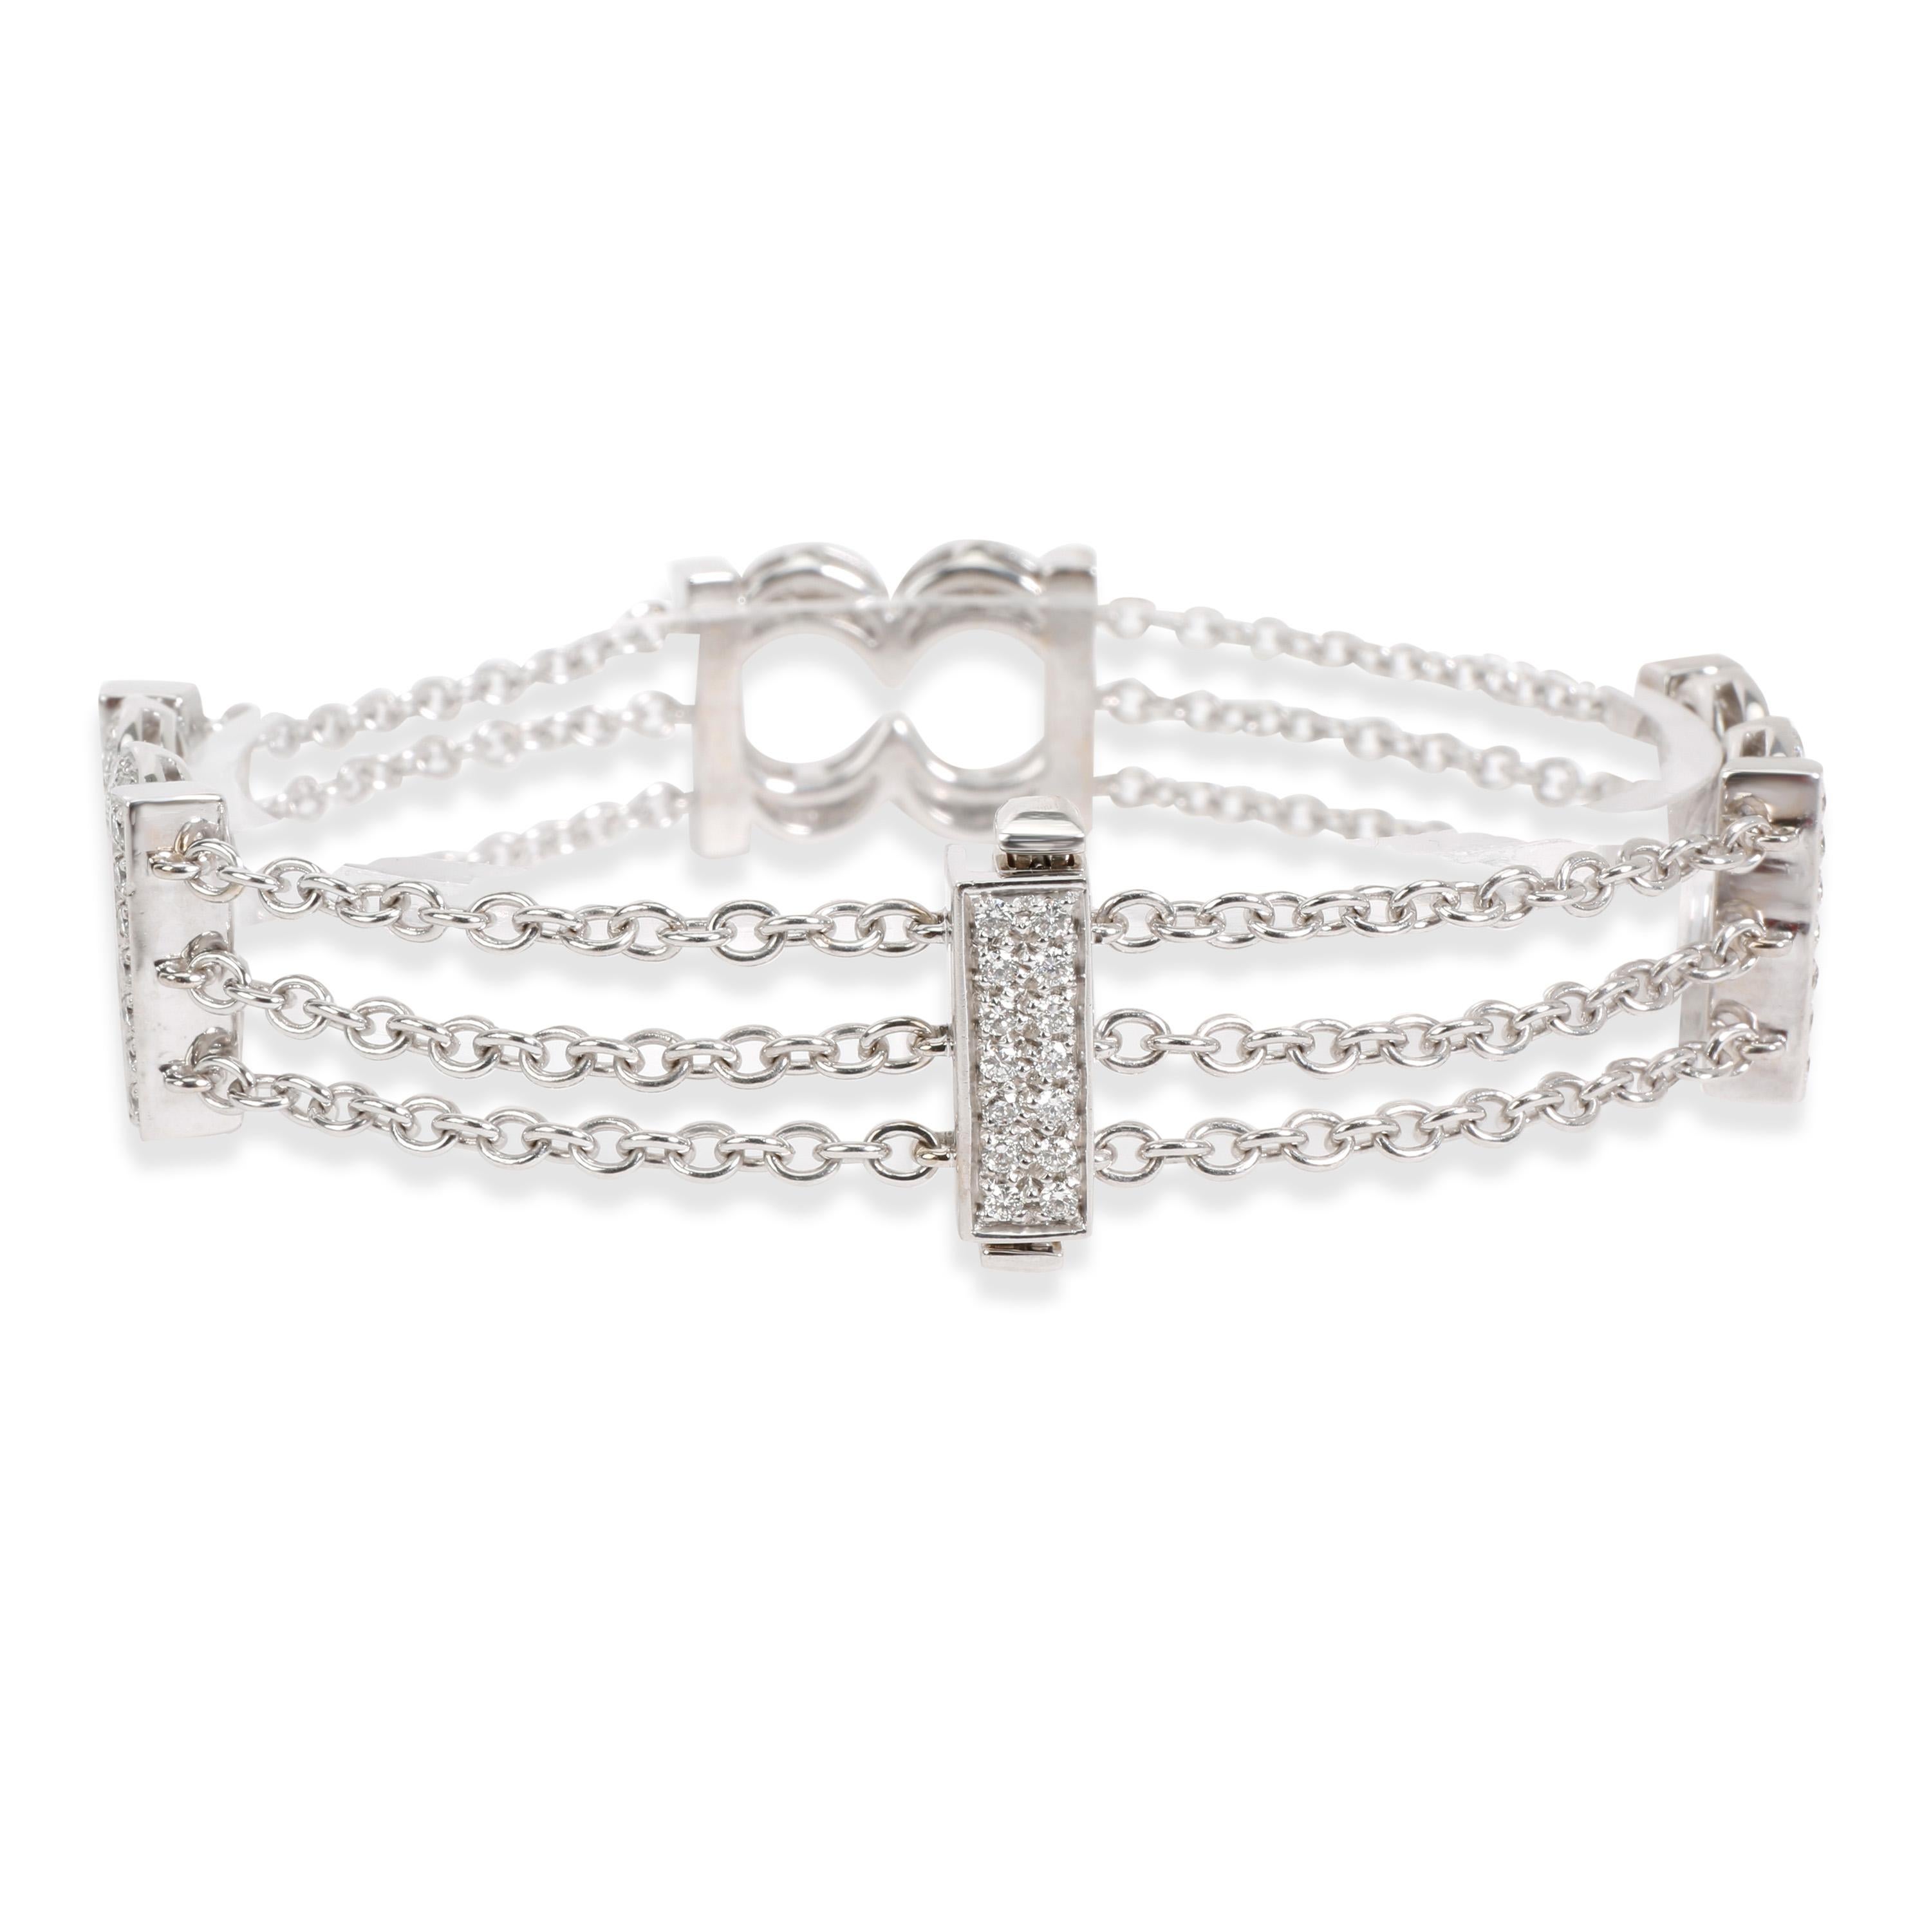 Bedat and Co. Orianne Collins Diamond Bracelet in 18K White Gold 1.5 CTW

PRIMARY DETAILS
SKU: 098459
Listing Title: Bedat and Co. Orianne Collins Diamond Bracelet in 18K White Gold 1.5 CTW
Condition Description: In excellent condition and recently